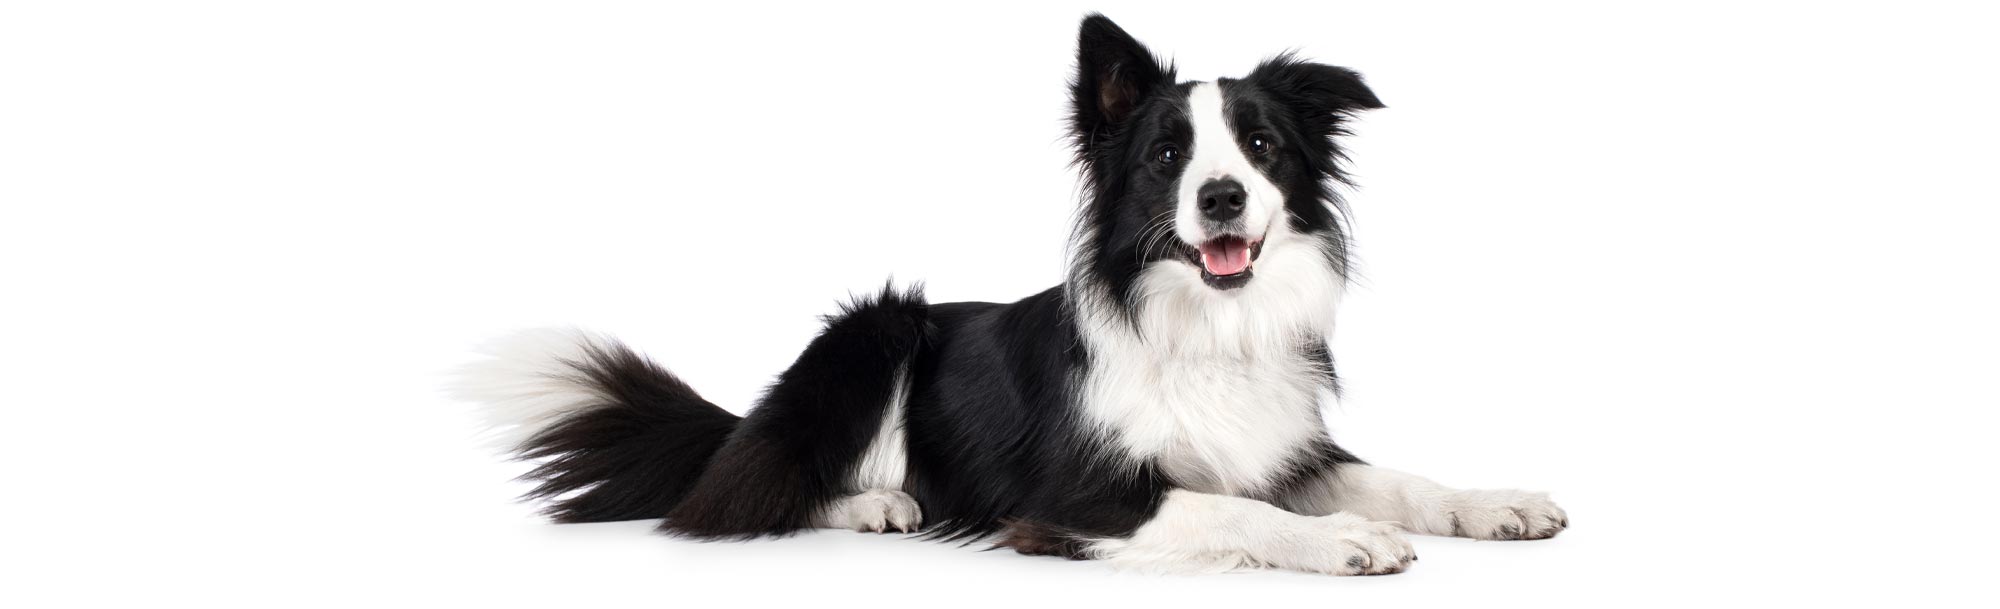 Border Collie Laying Down